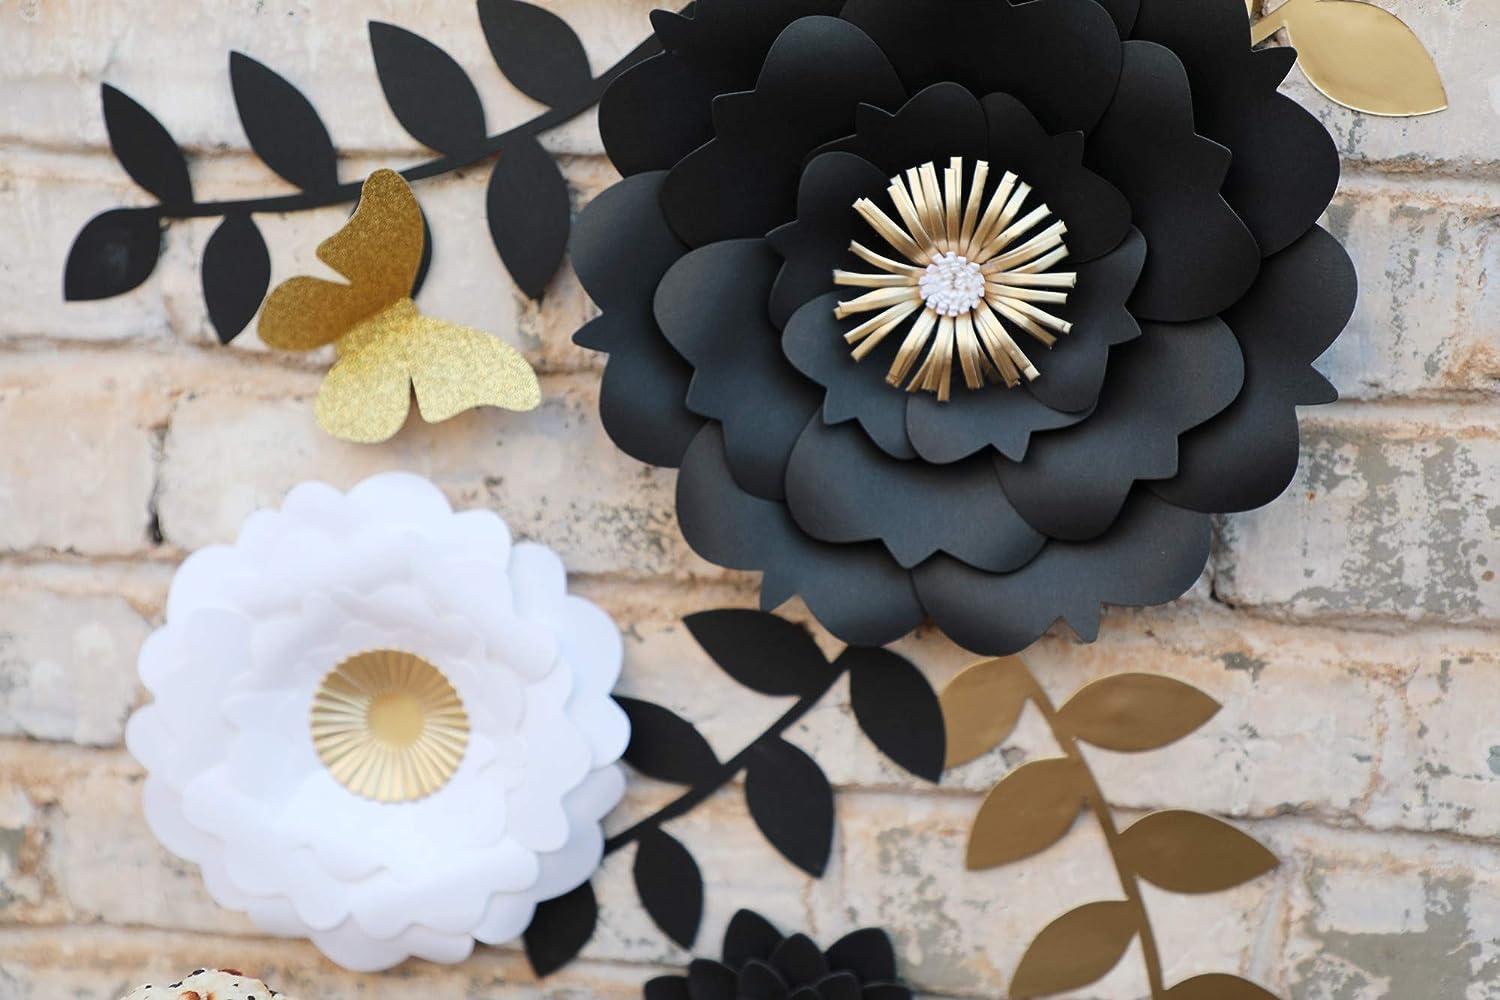 Black and white paper flowers backdrop - Large paper flowers wall decor   Large paper flowers wall decor, Paper flower wall decor, Paper flower wall